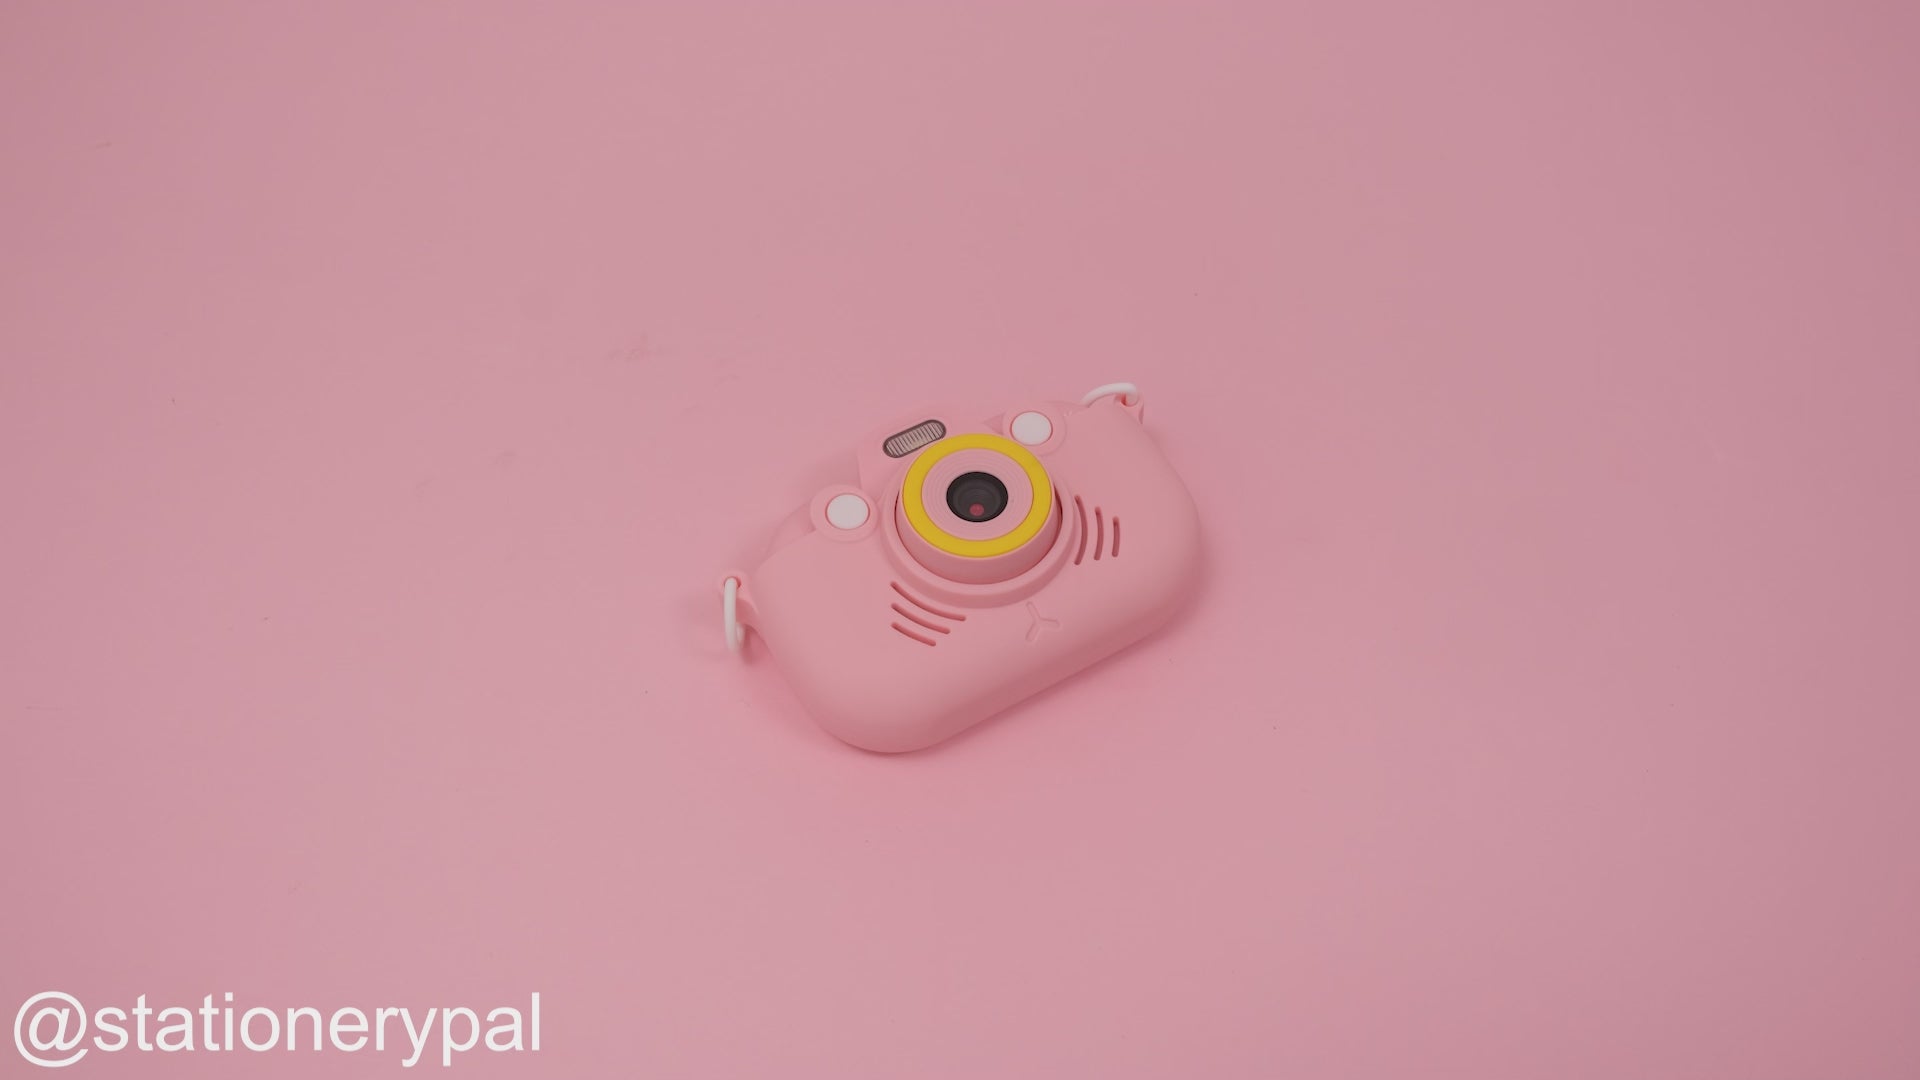 Cute Snap Kid High Definition Video Camera - Pink